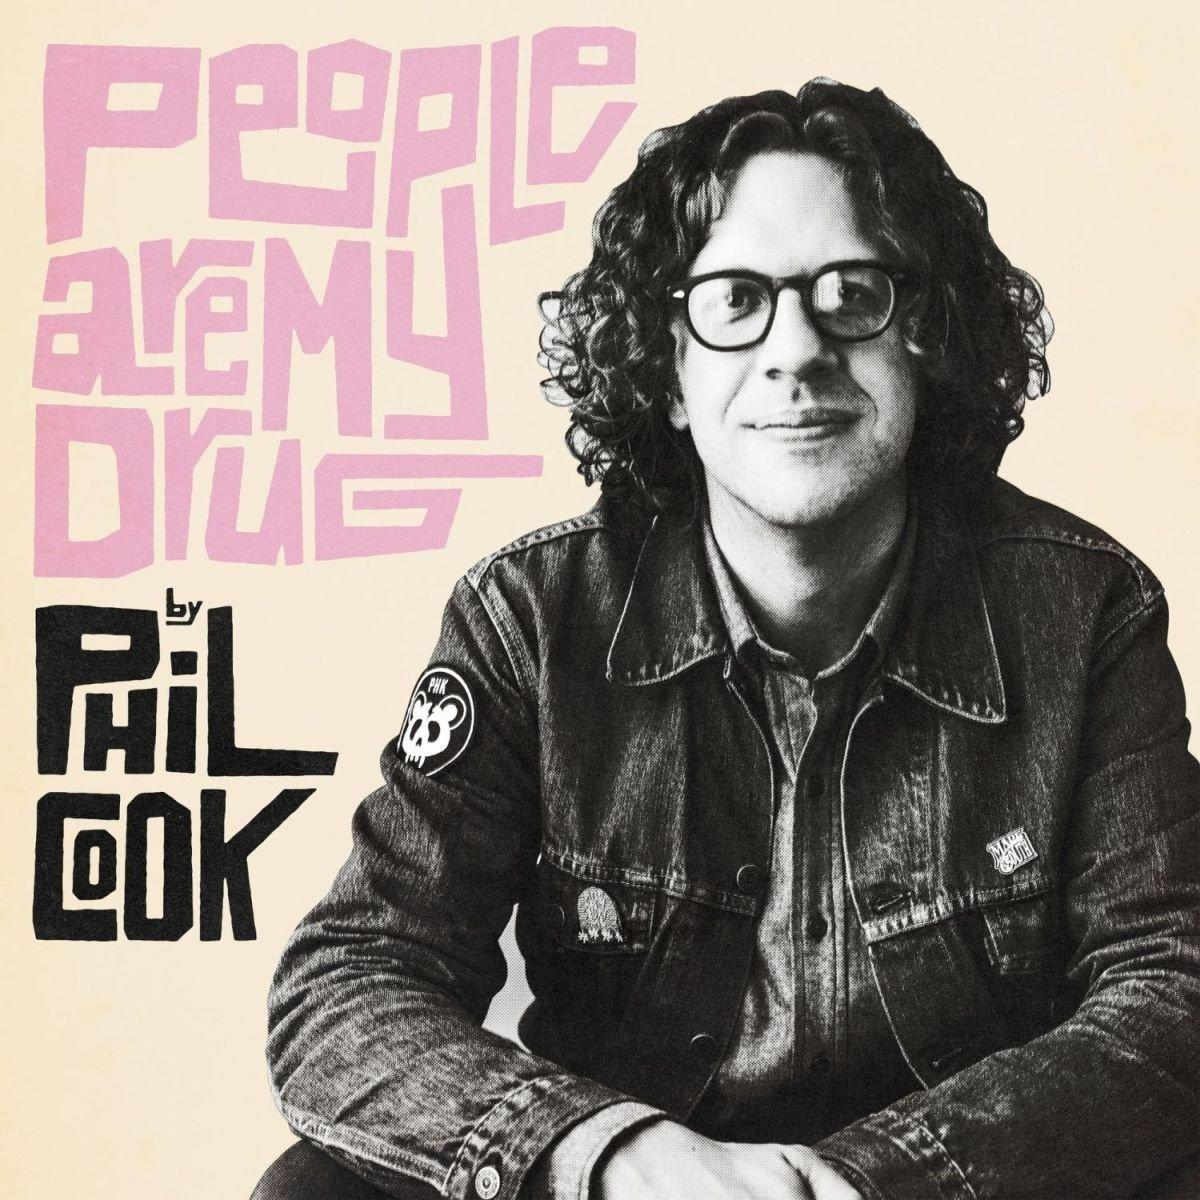 My - - Cook Phil (CD) Drug People Are